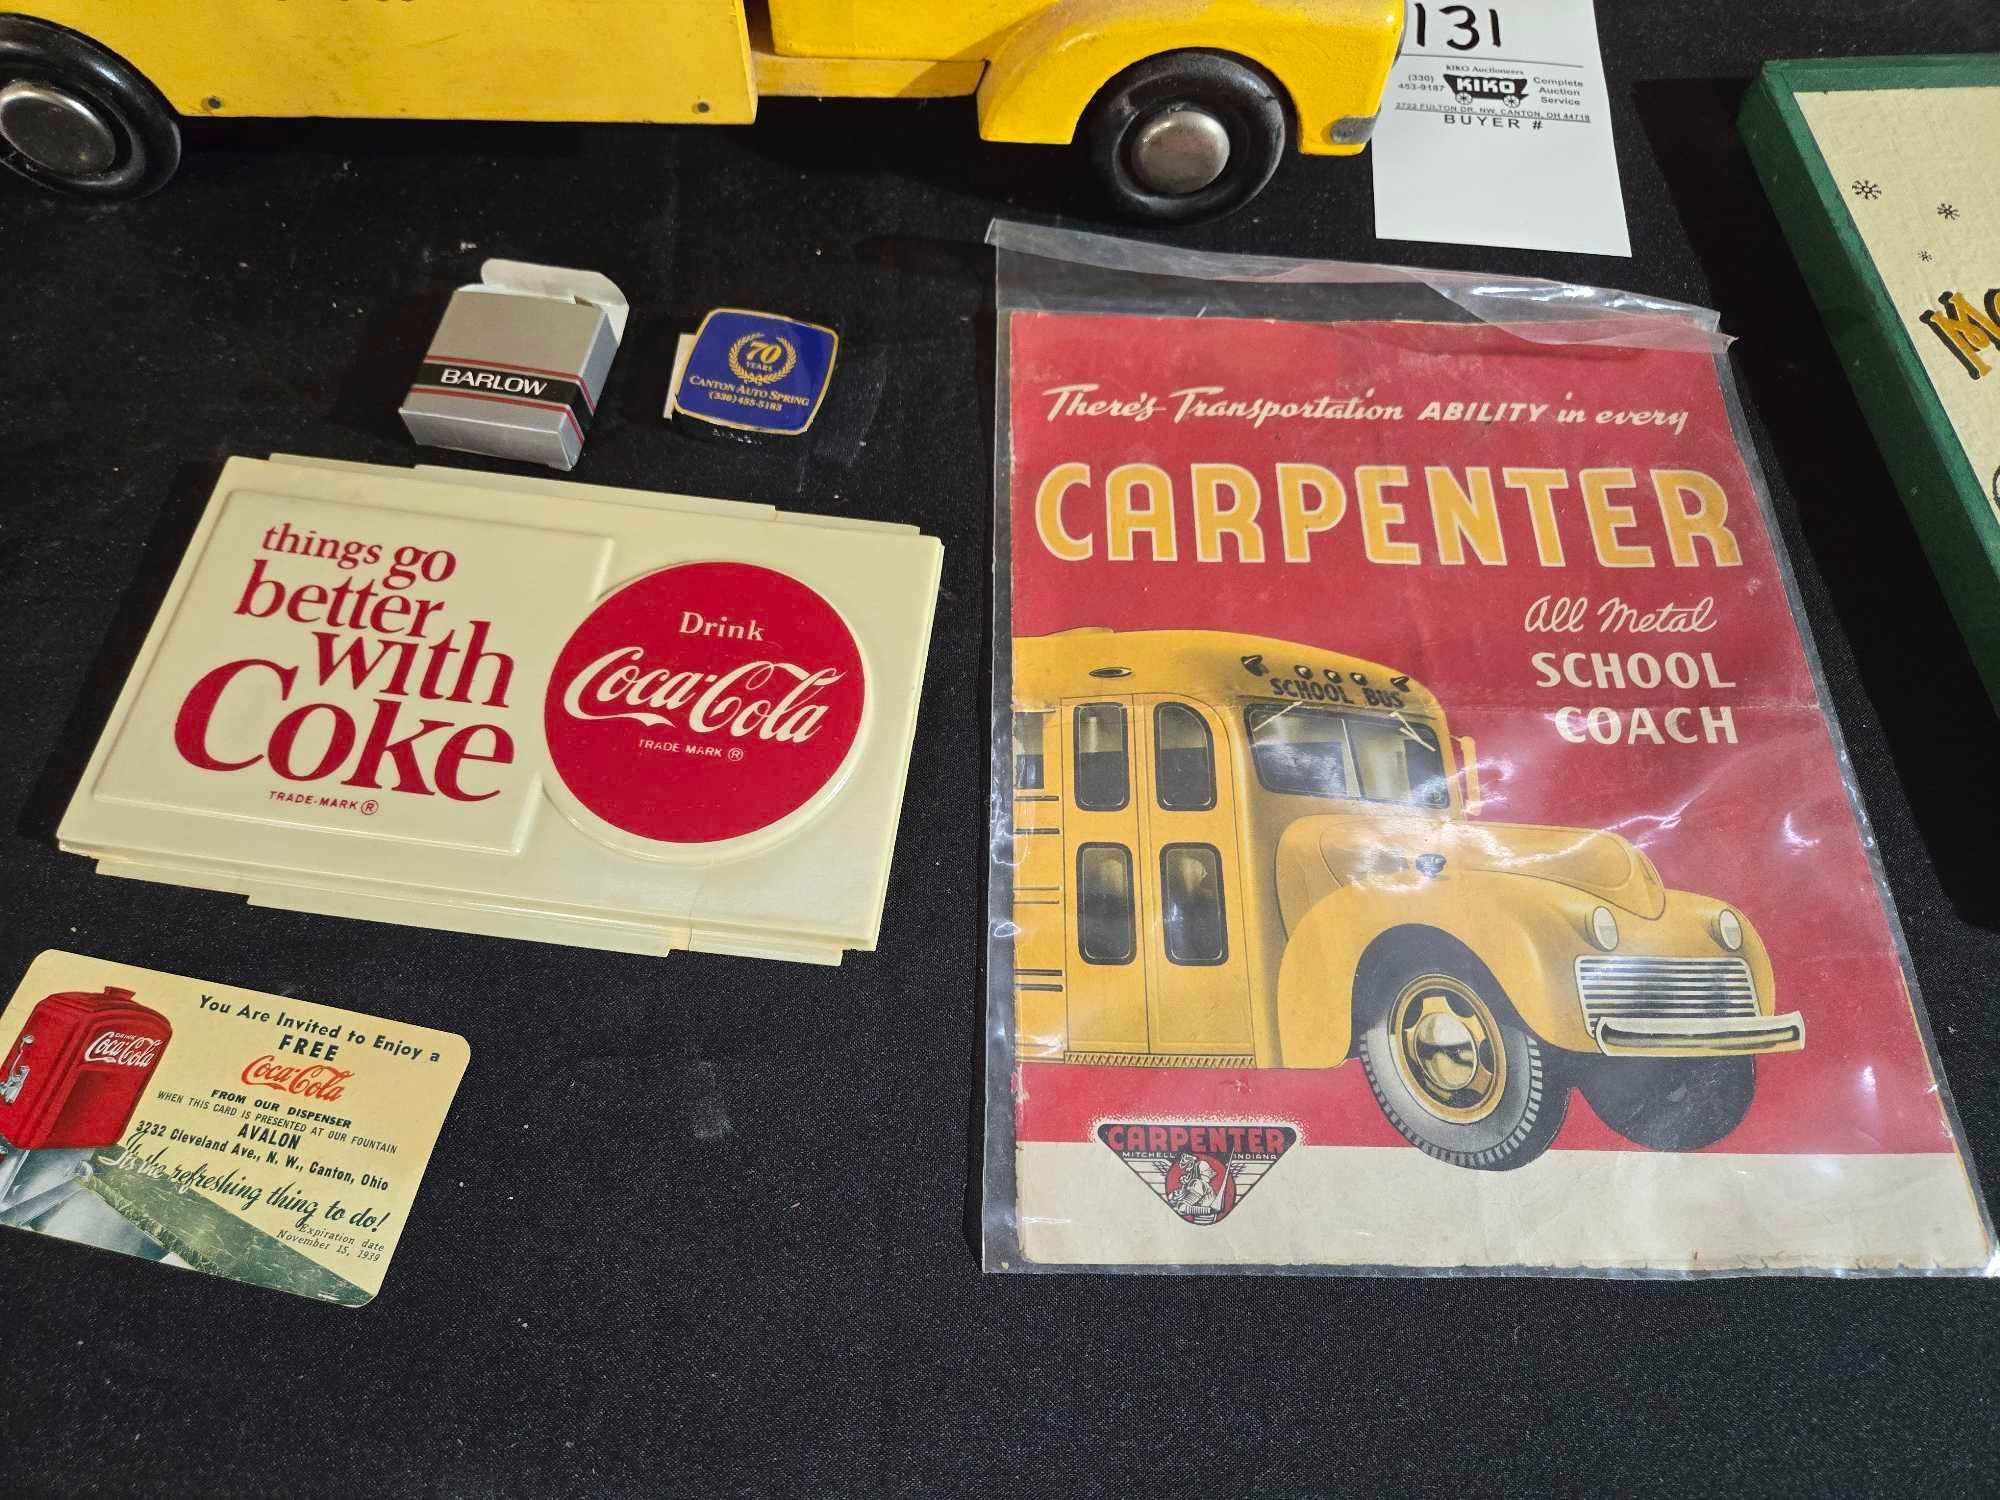 Buddy Wooden Coca Cola Truck, Cardboard Carriers, Advertising